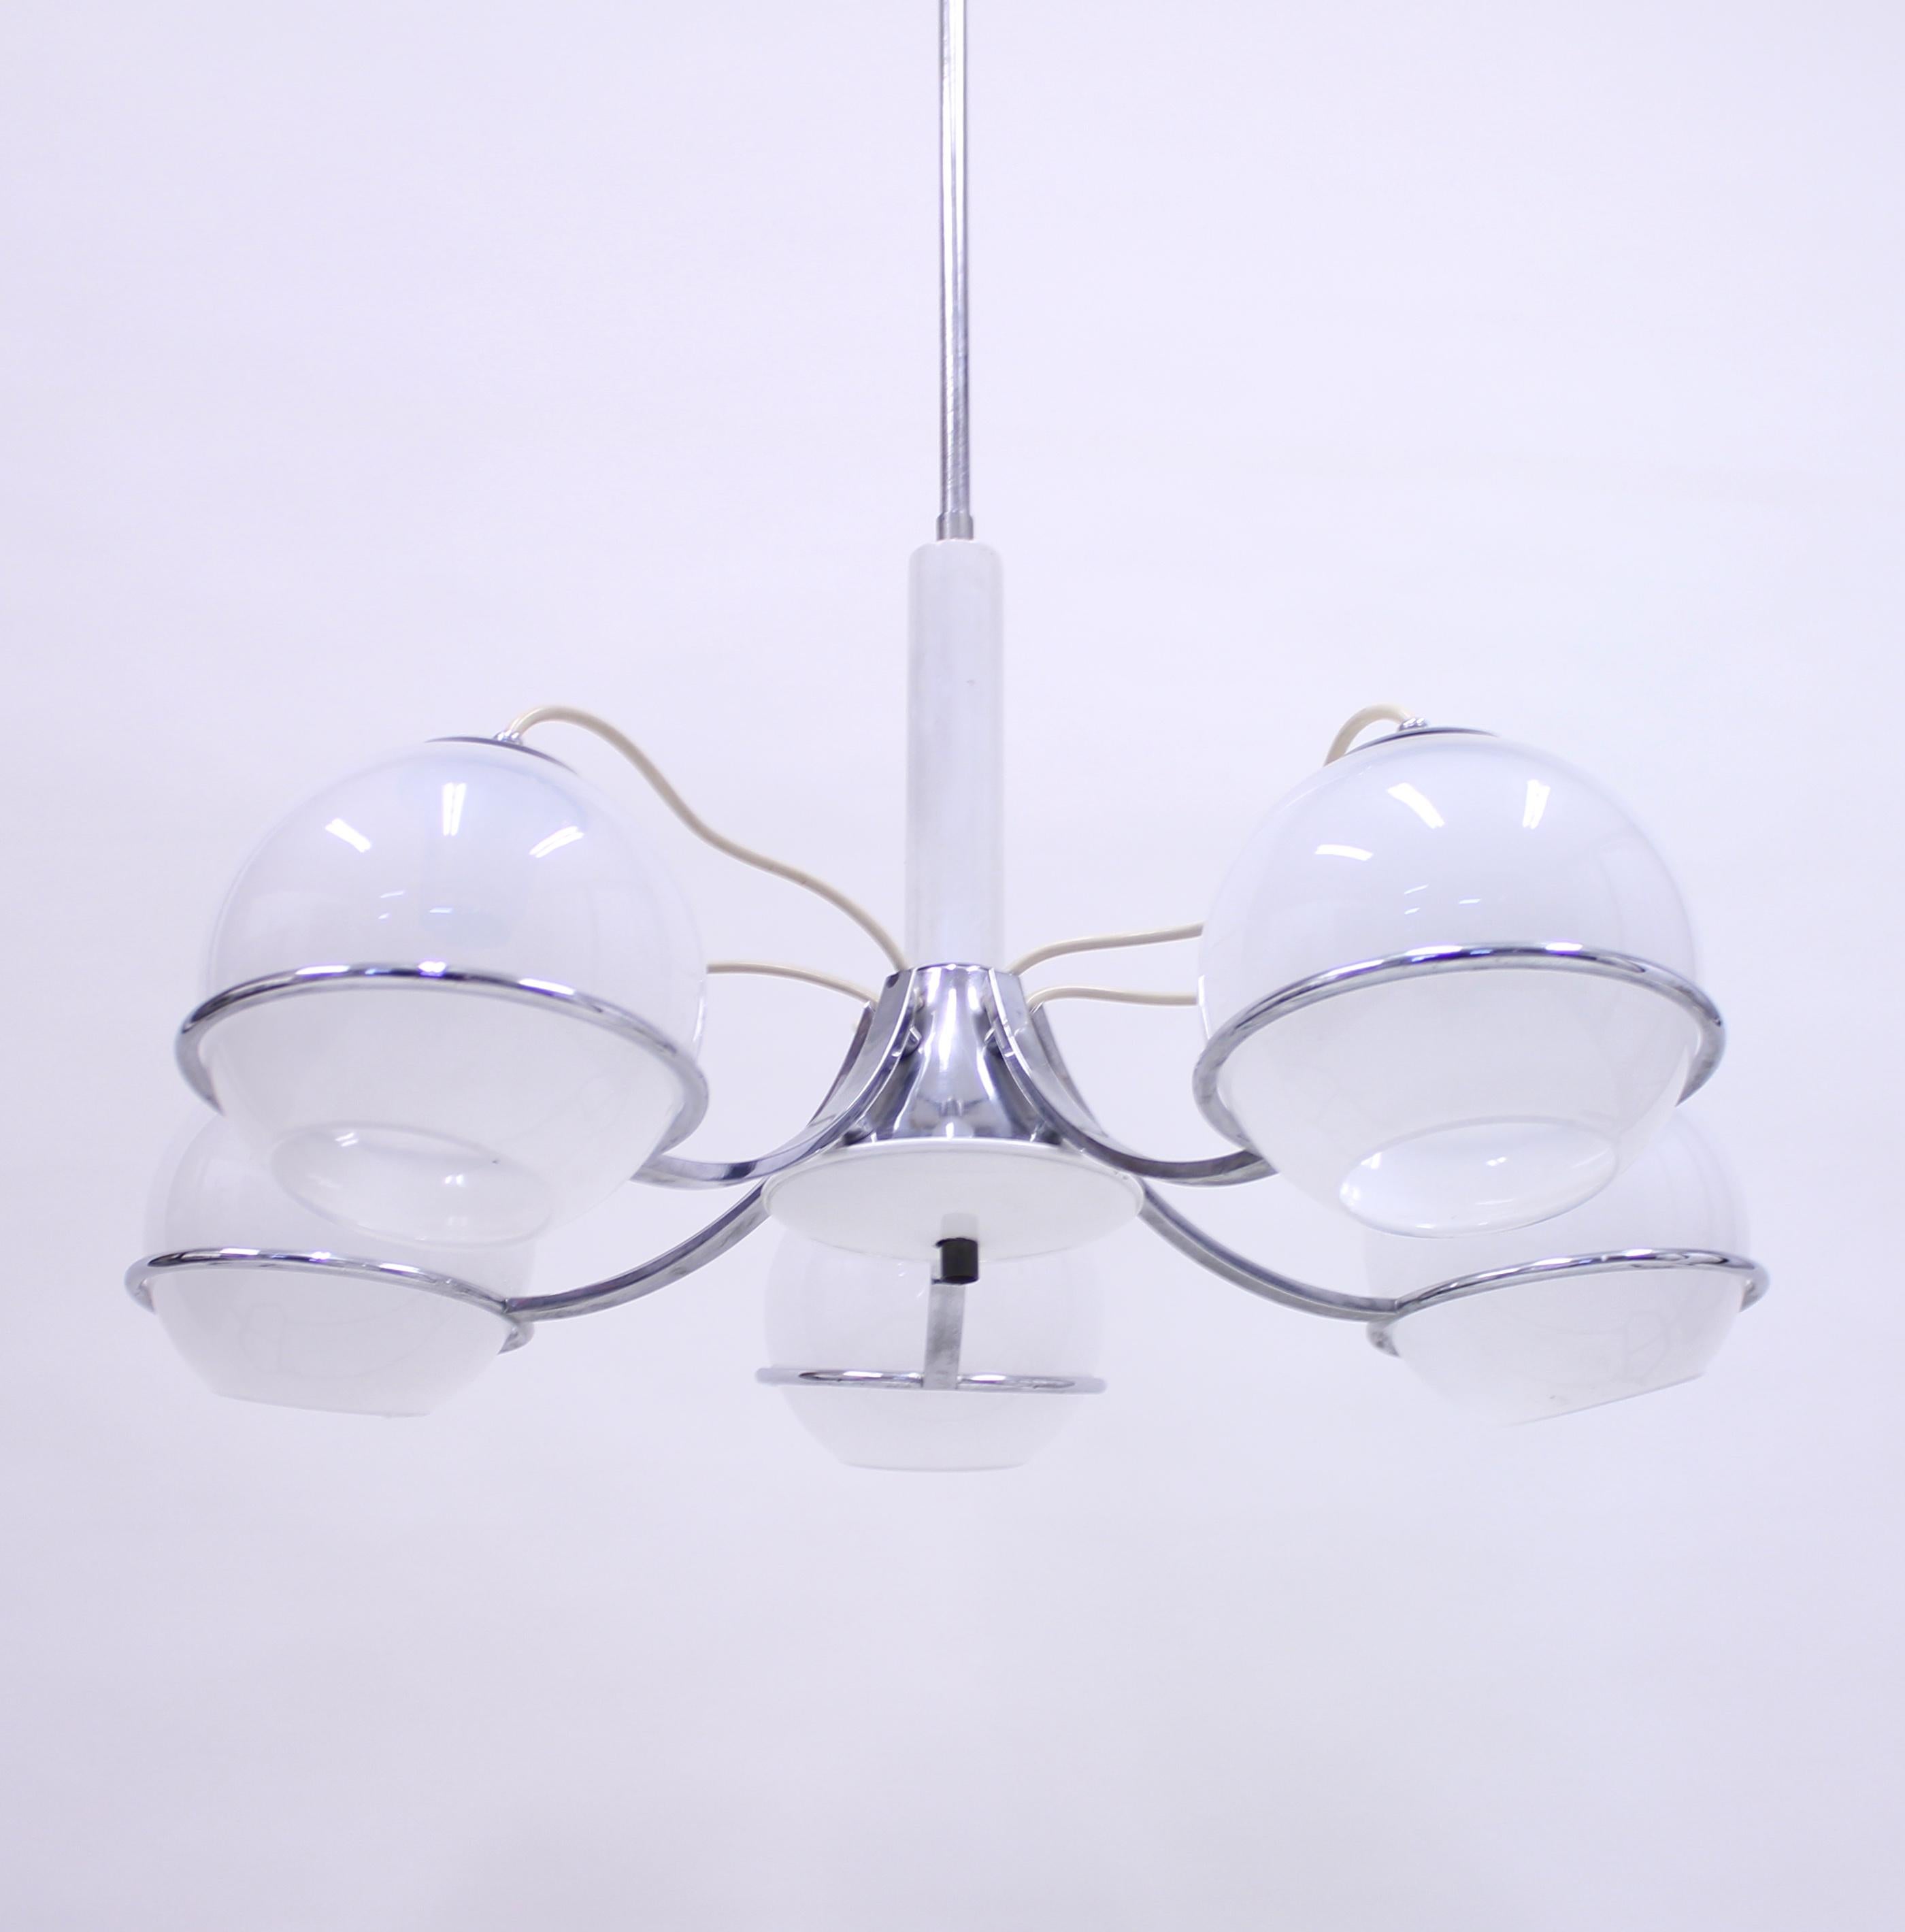 Space Age Italian Ceiling Lamp Attributed to Gino Sarfatti, 1960s For Sale